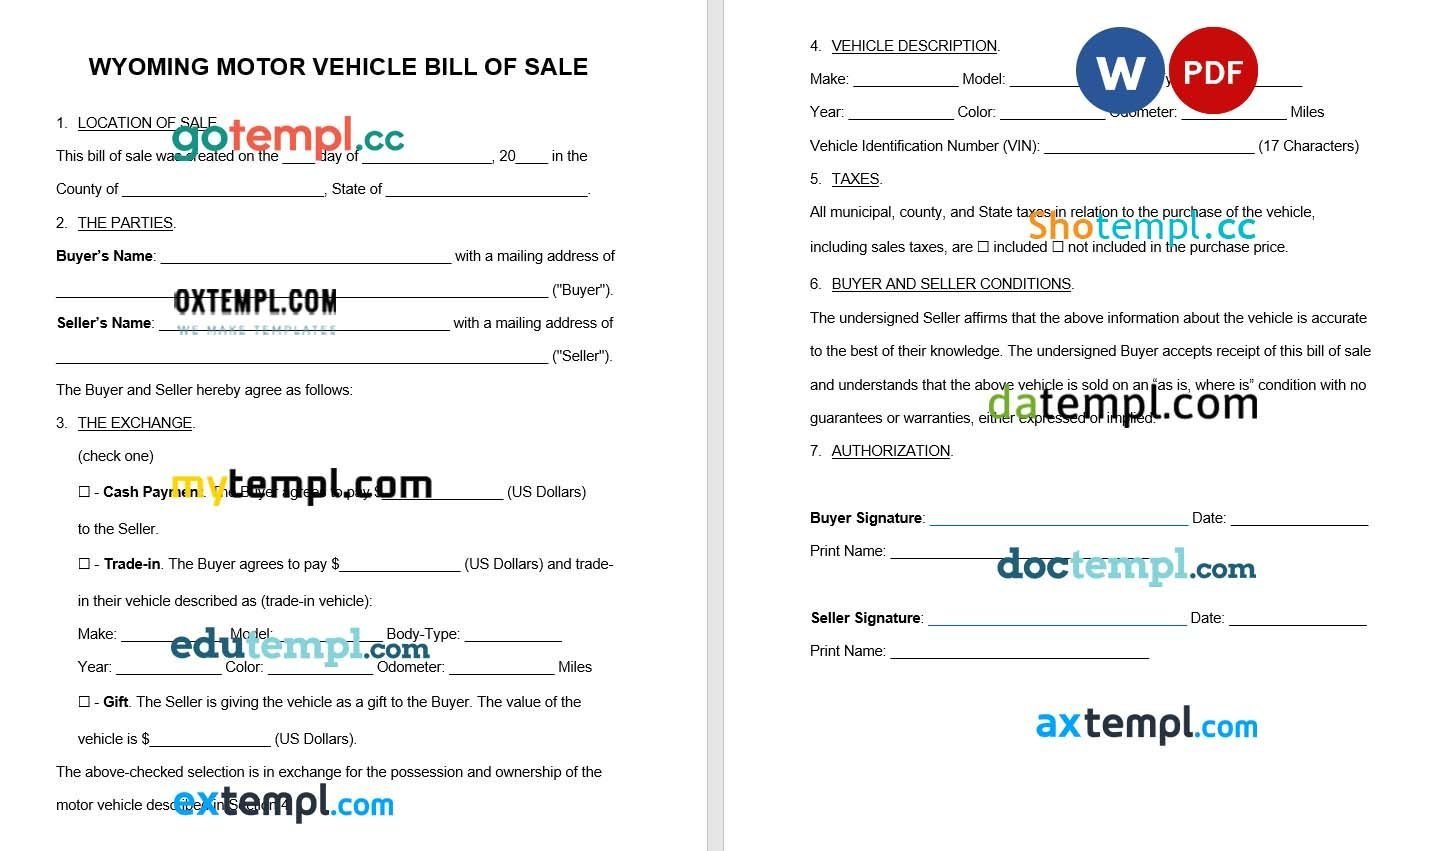 Wyoming Vehicle Bill of Sale example, fully editable